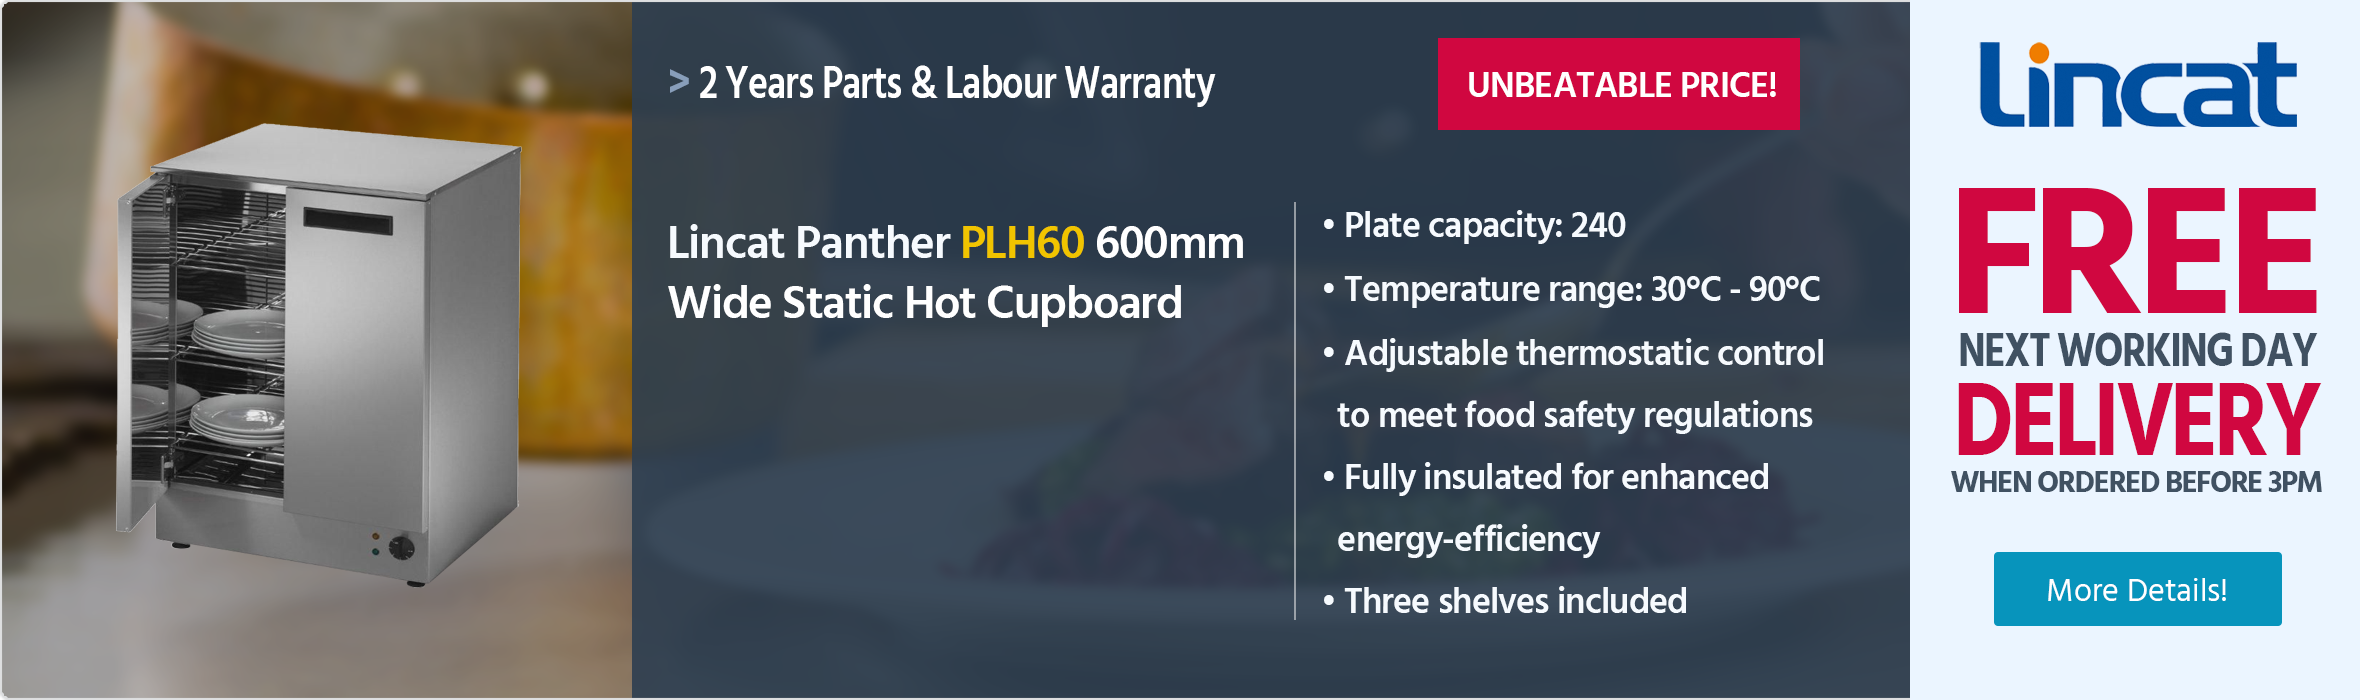 Lincat Panther PLH60 600mm Wide Static Hot Cupboard